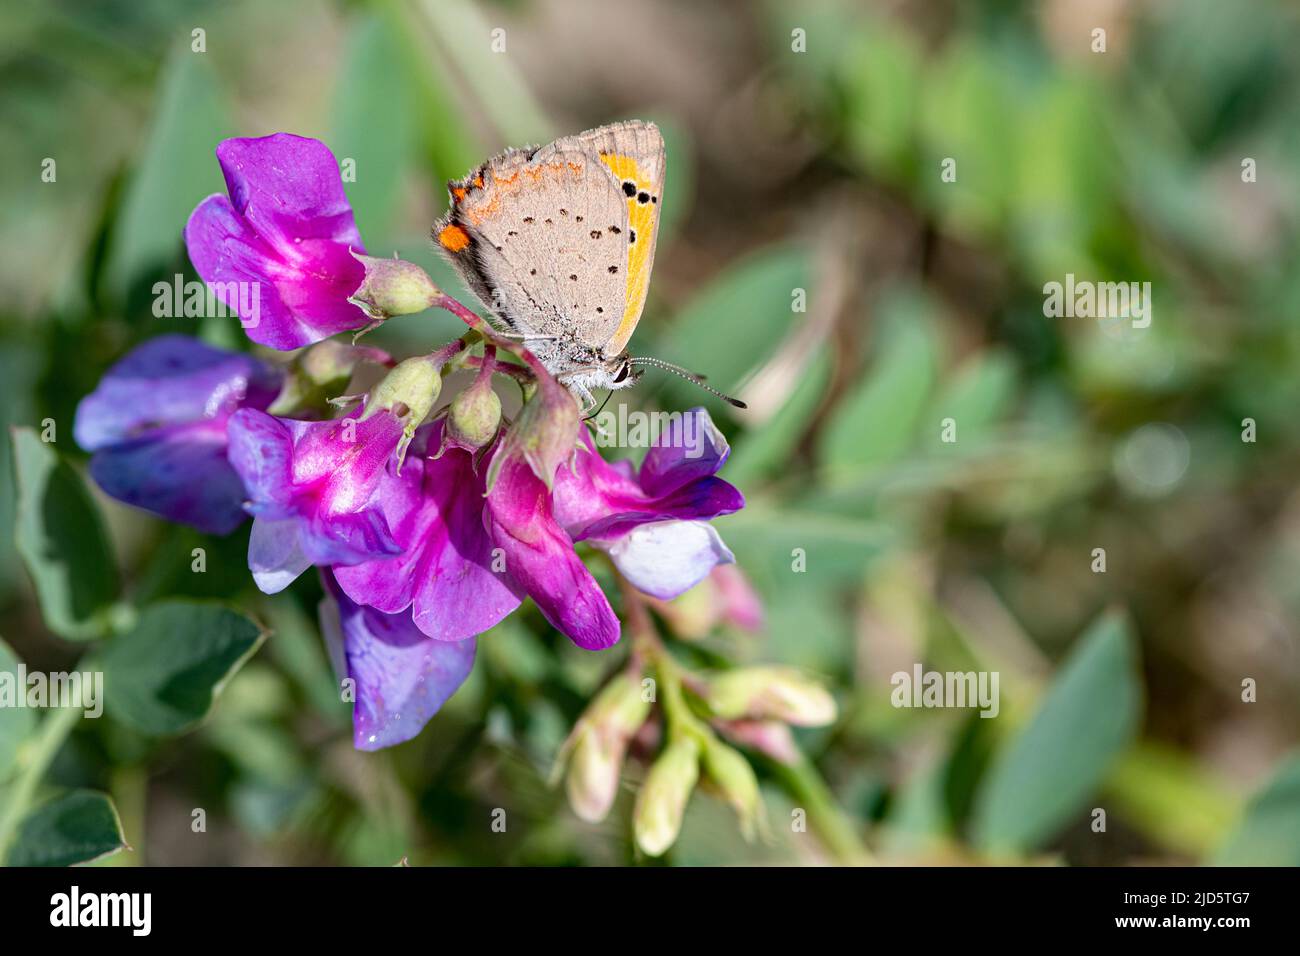 Common copper (Lycaena phlaeas) from Lista, southern Norway. Stock Photo